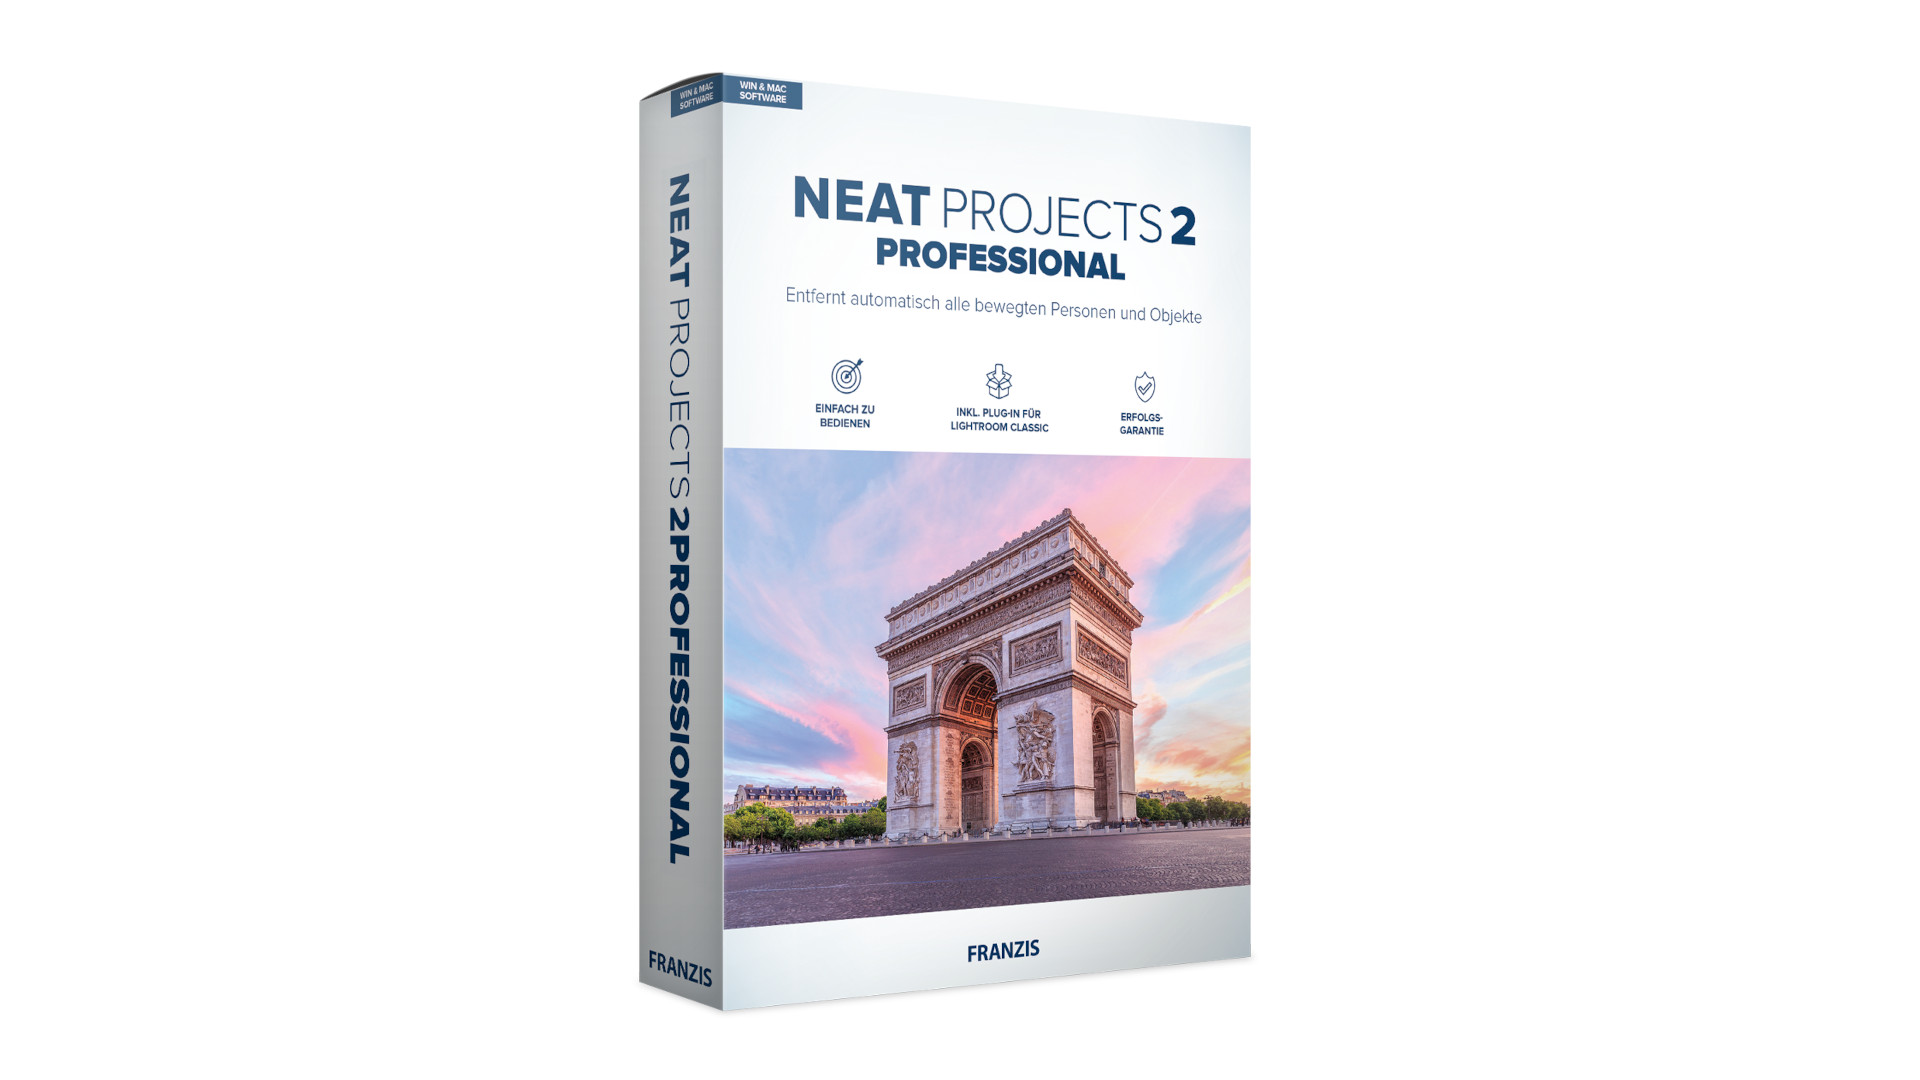 (33.89$) NEAT projects 2 Pro - Project Software Key (Lifetime / 1 PC)